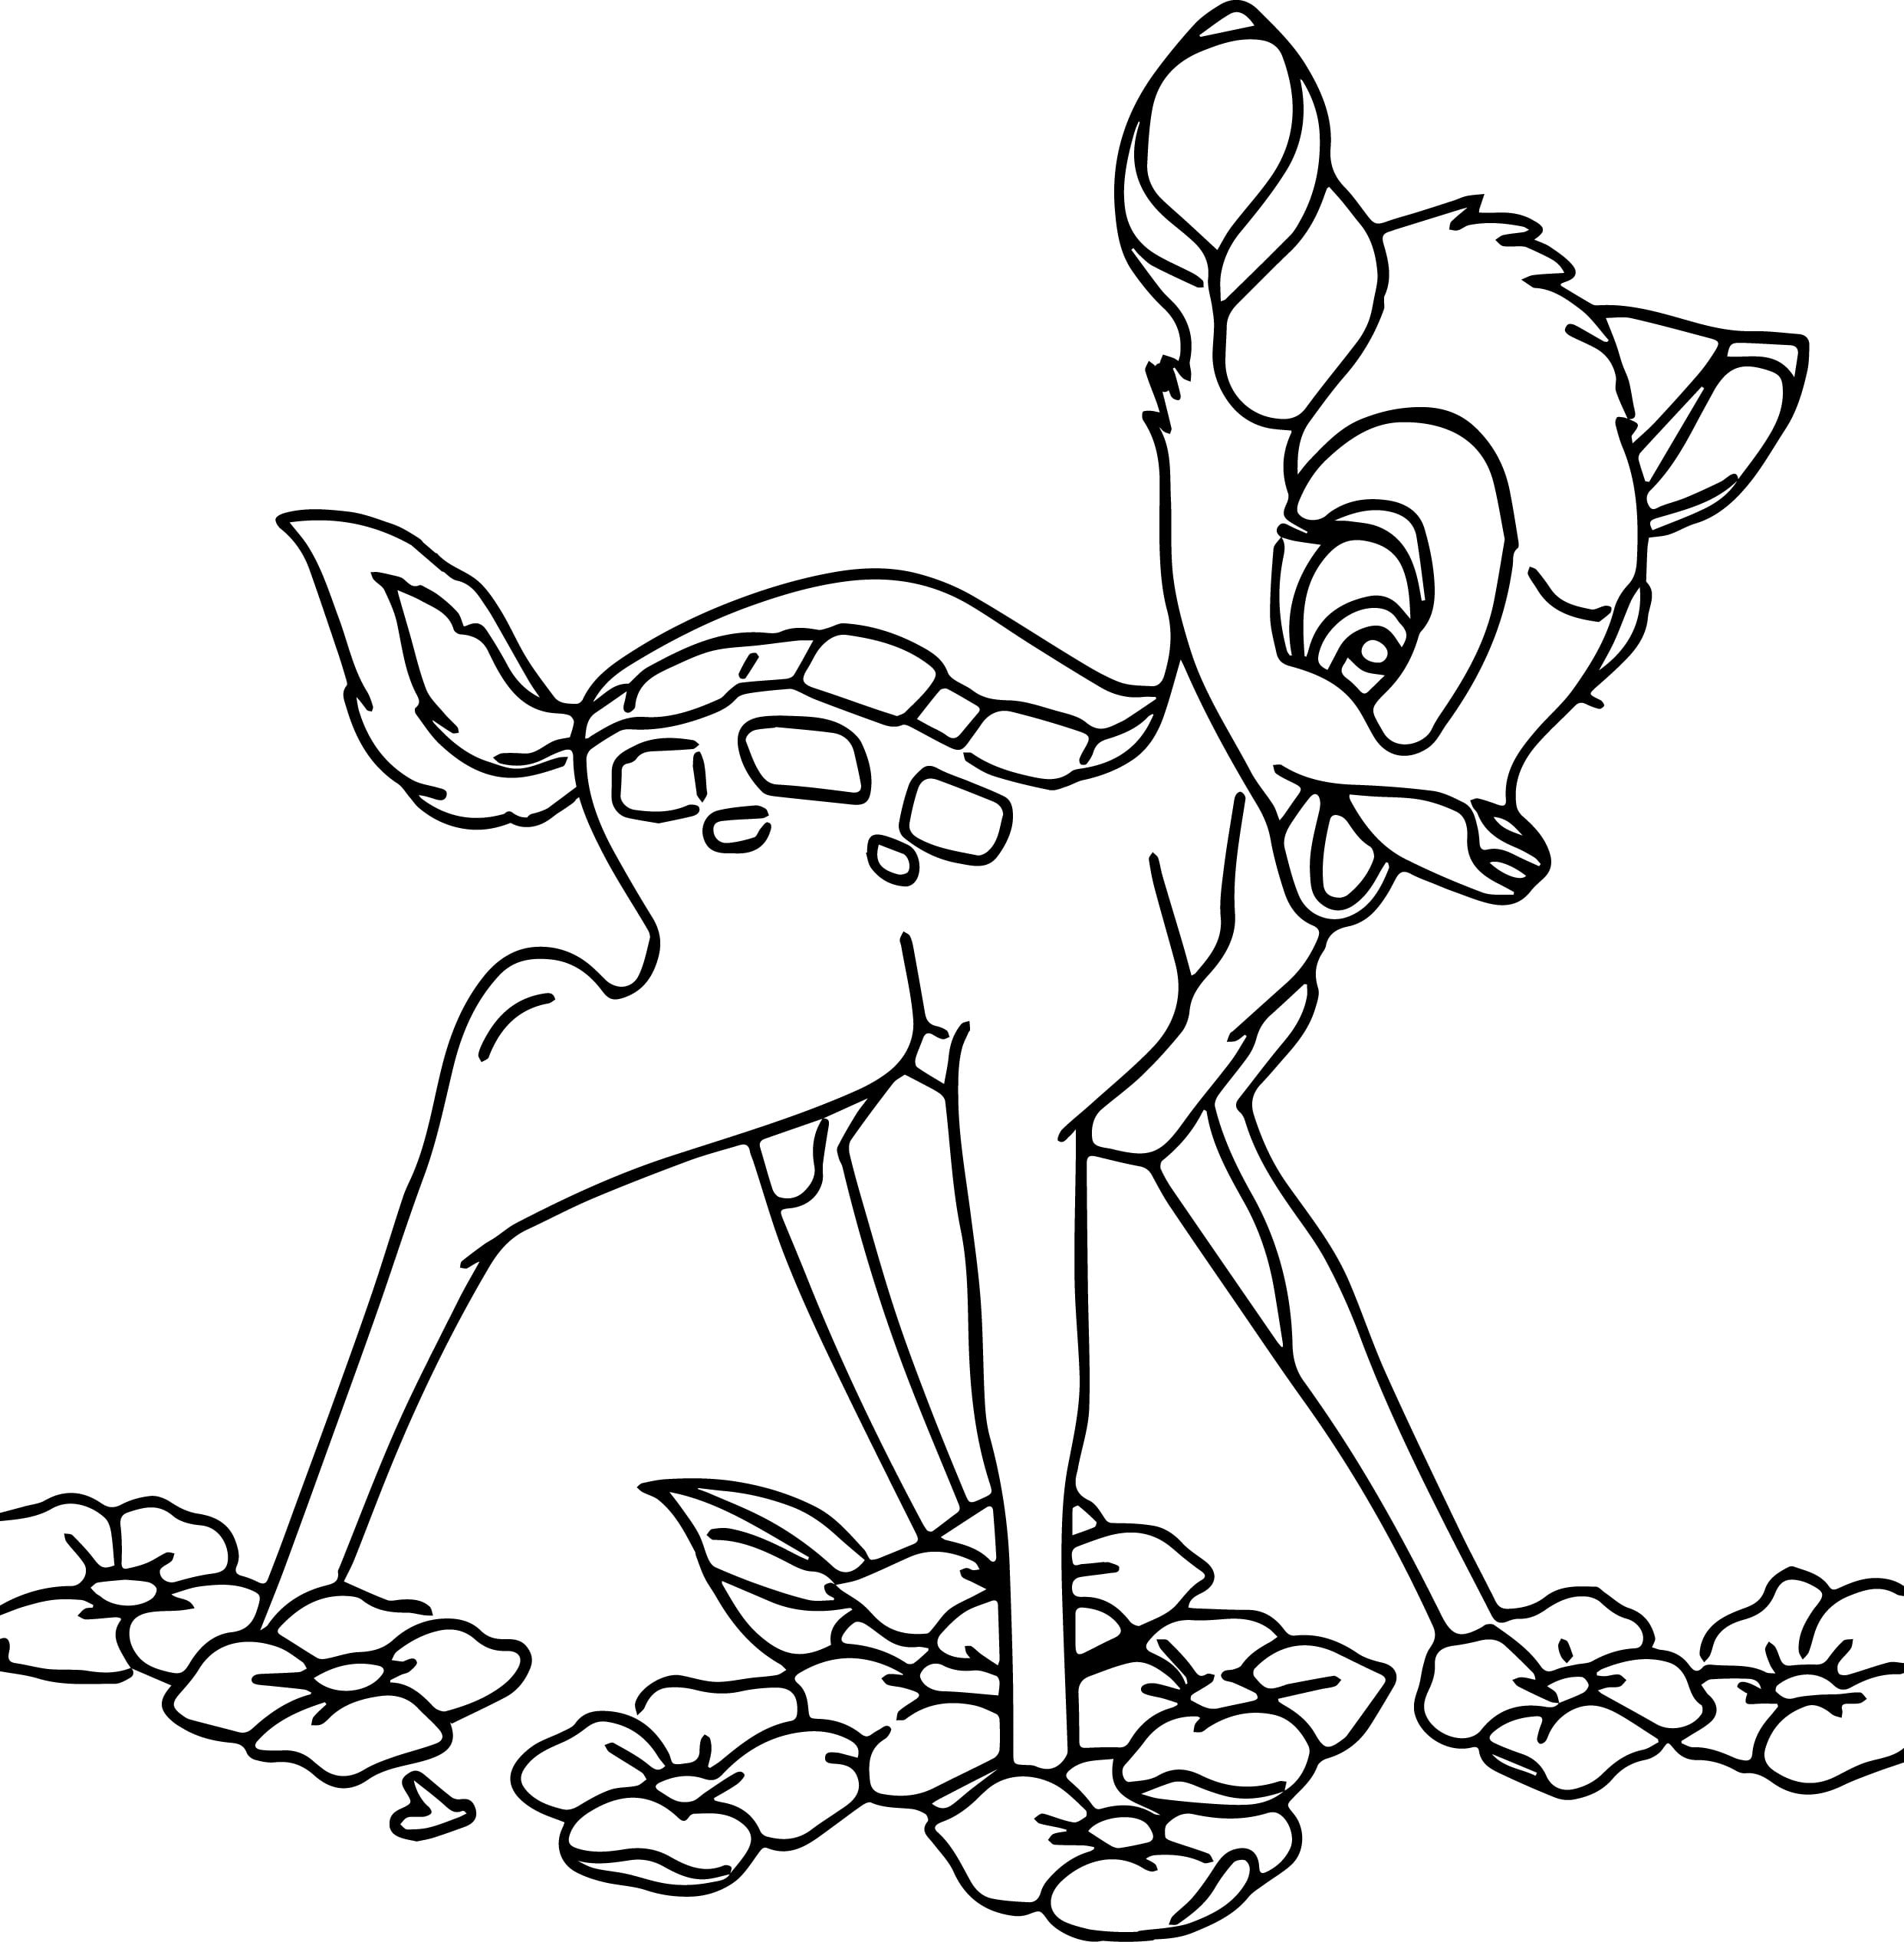 Bambi Coloring Pages - Wecoloringpage.com